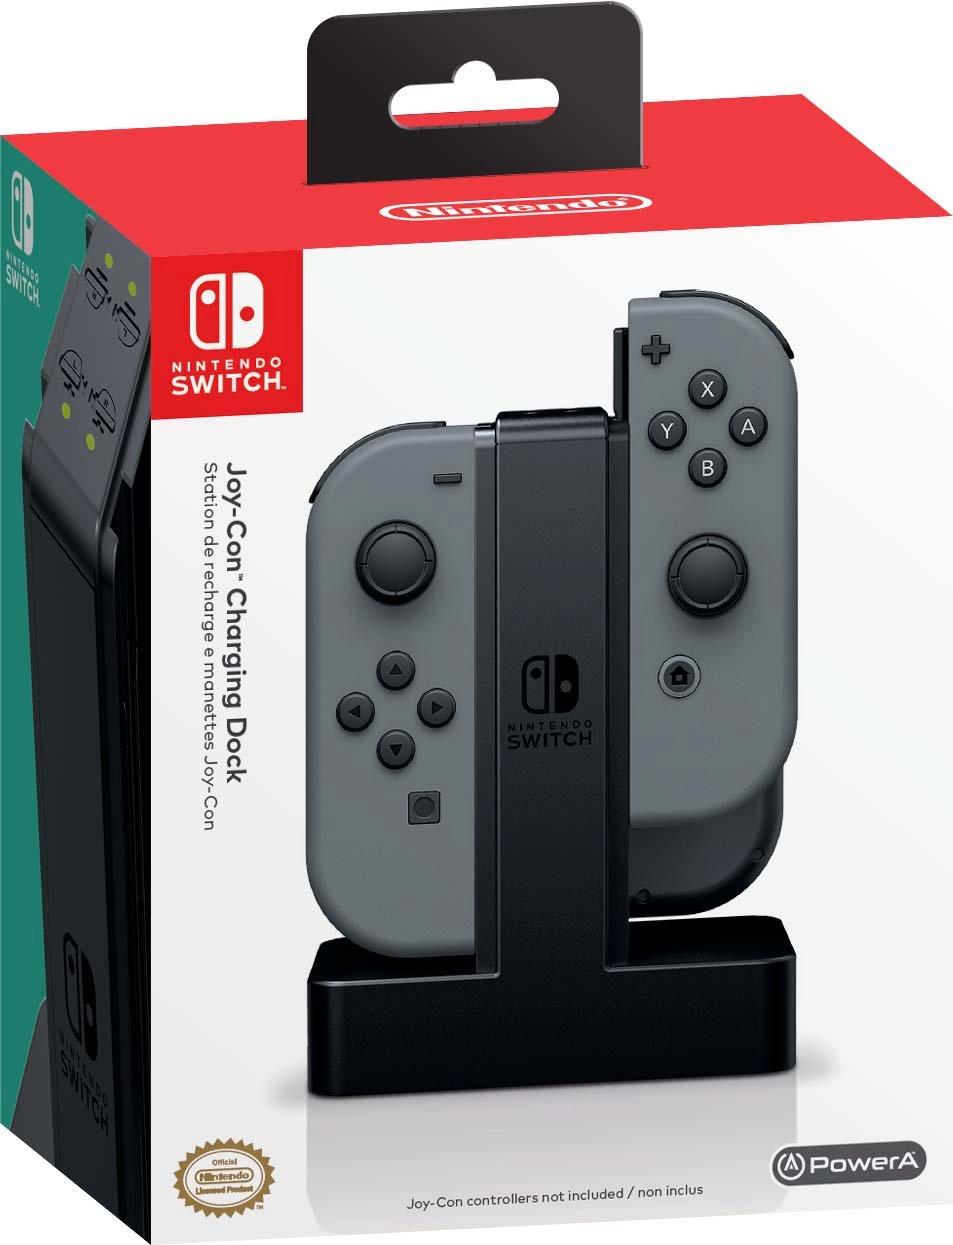 does the nintendo switch come with a docking station